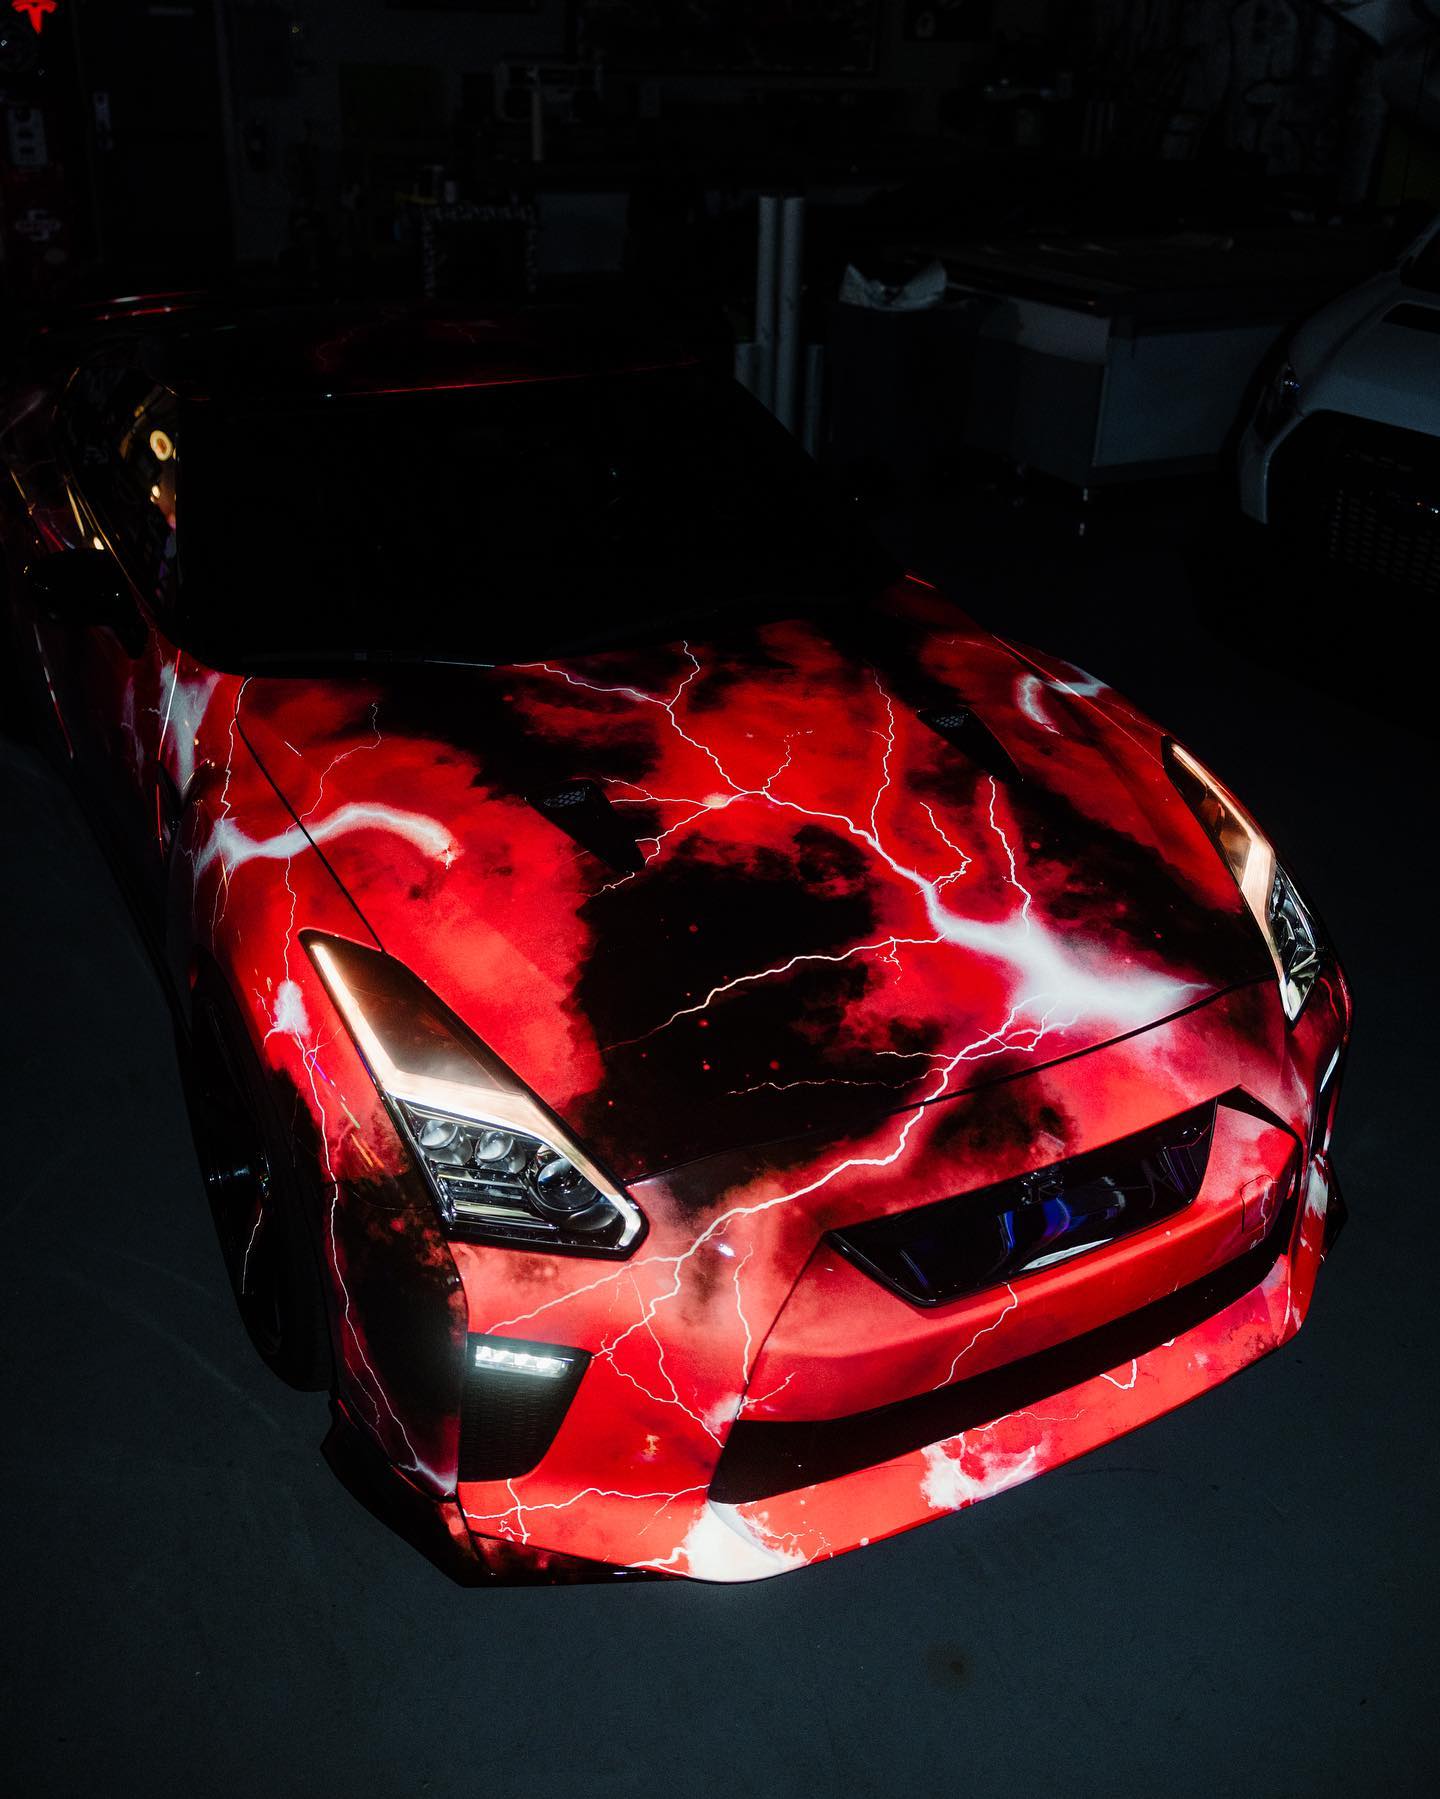 Nissan GT-R Is a Perfectly Custom Lightning Storm of Red, Black